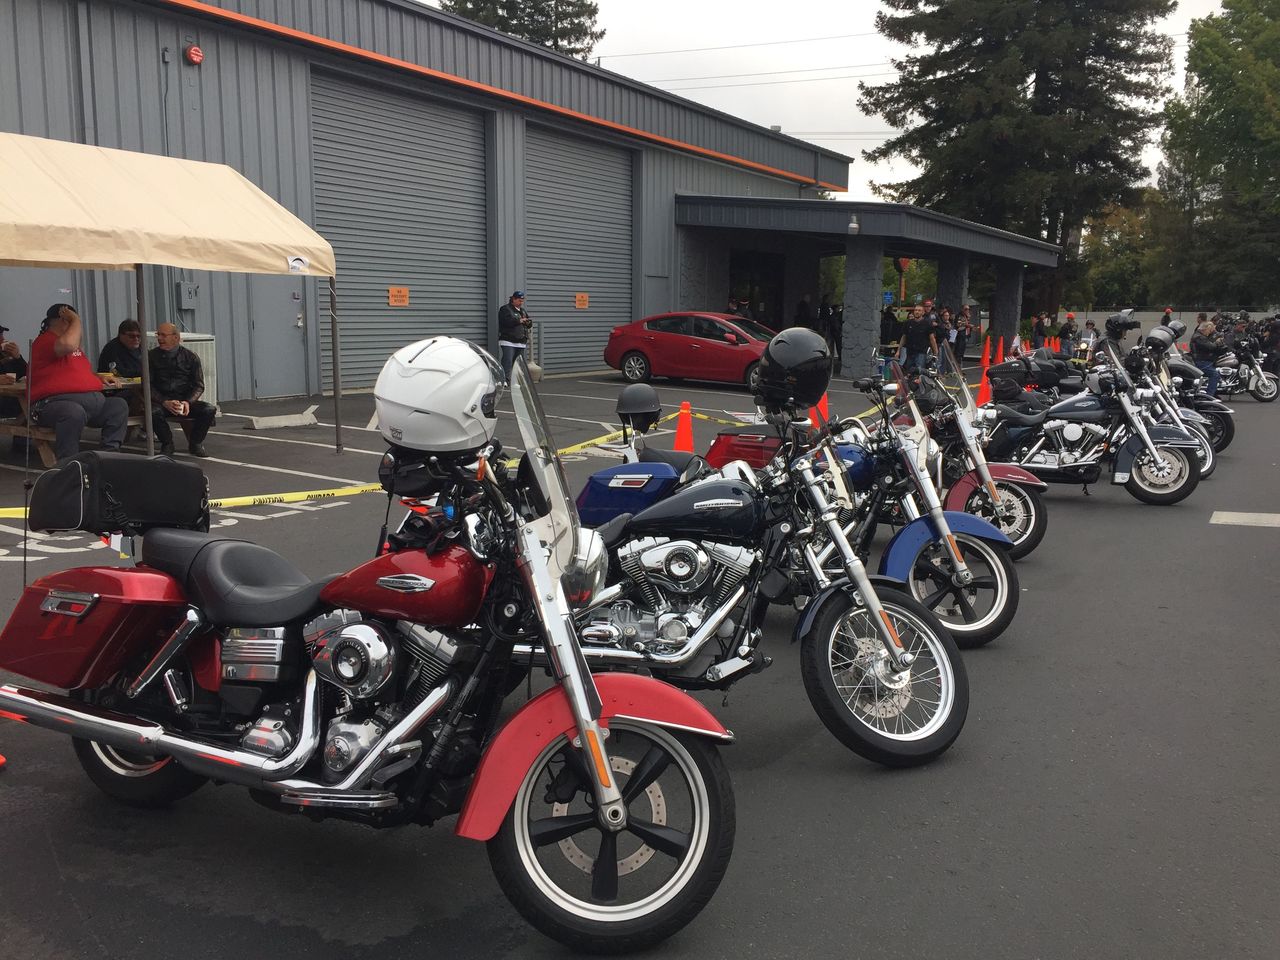 Scarlet is eager to start the Poker run from Cotati